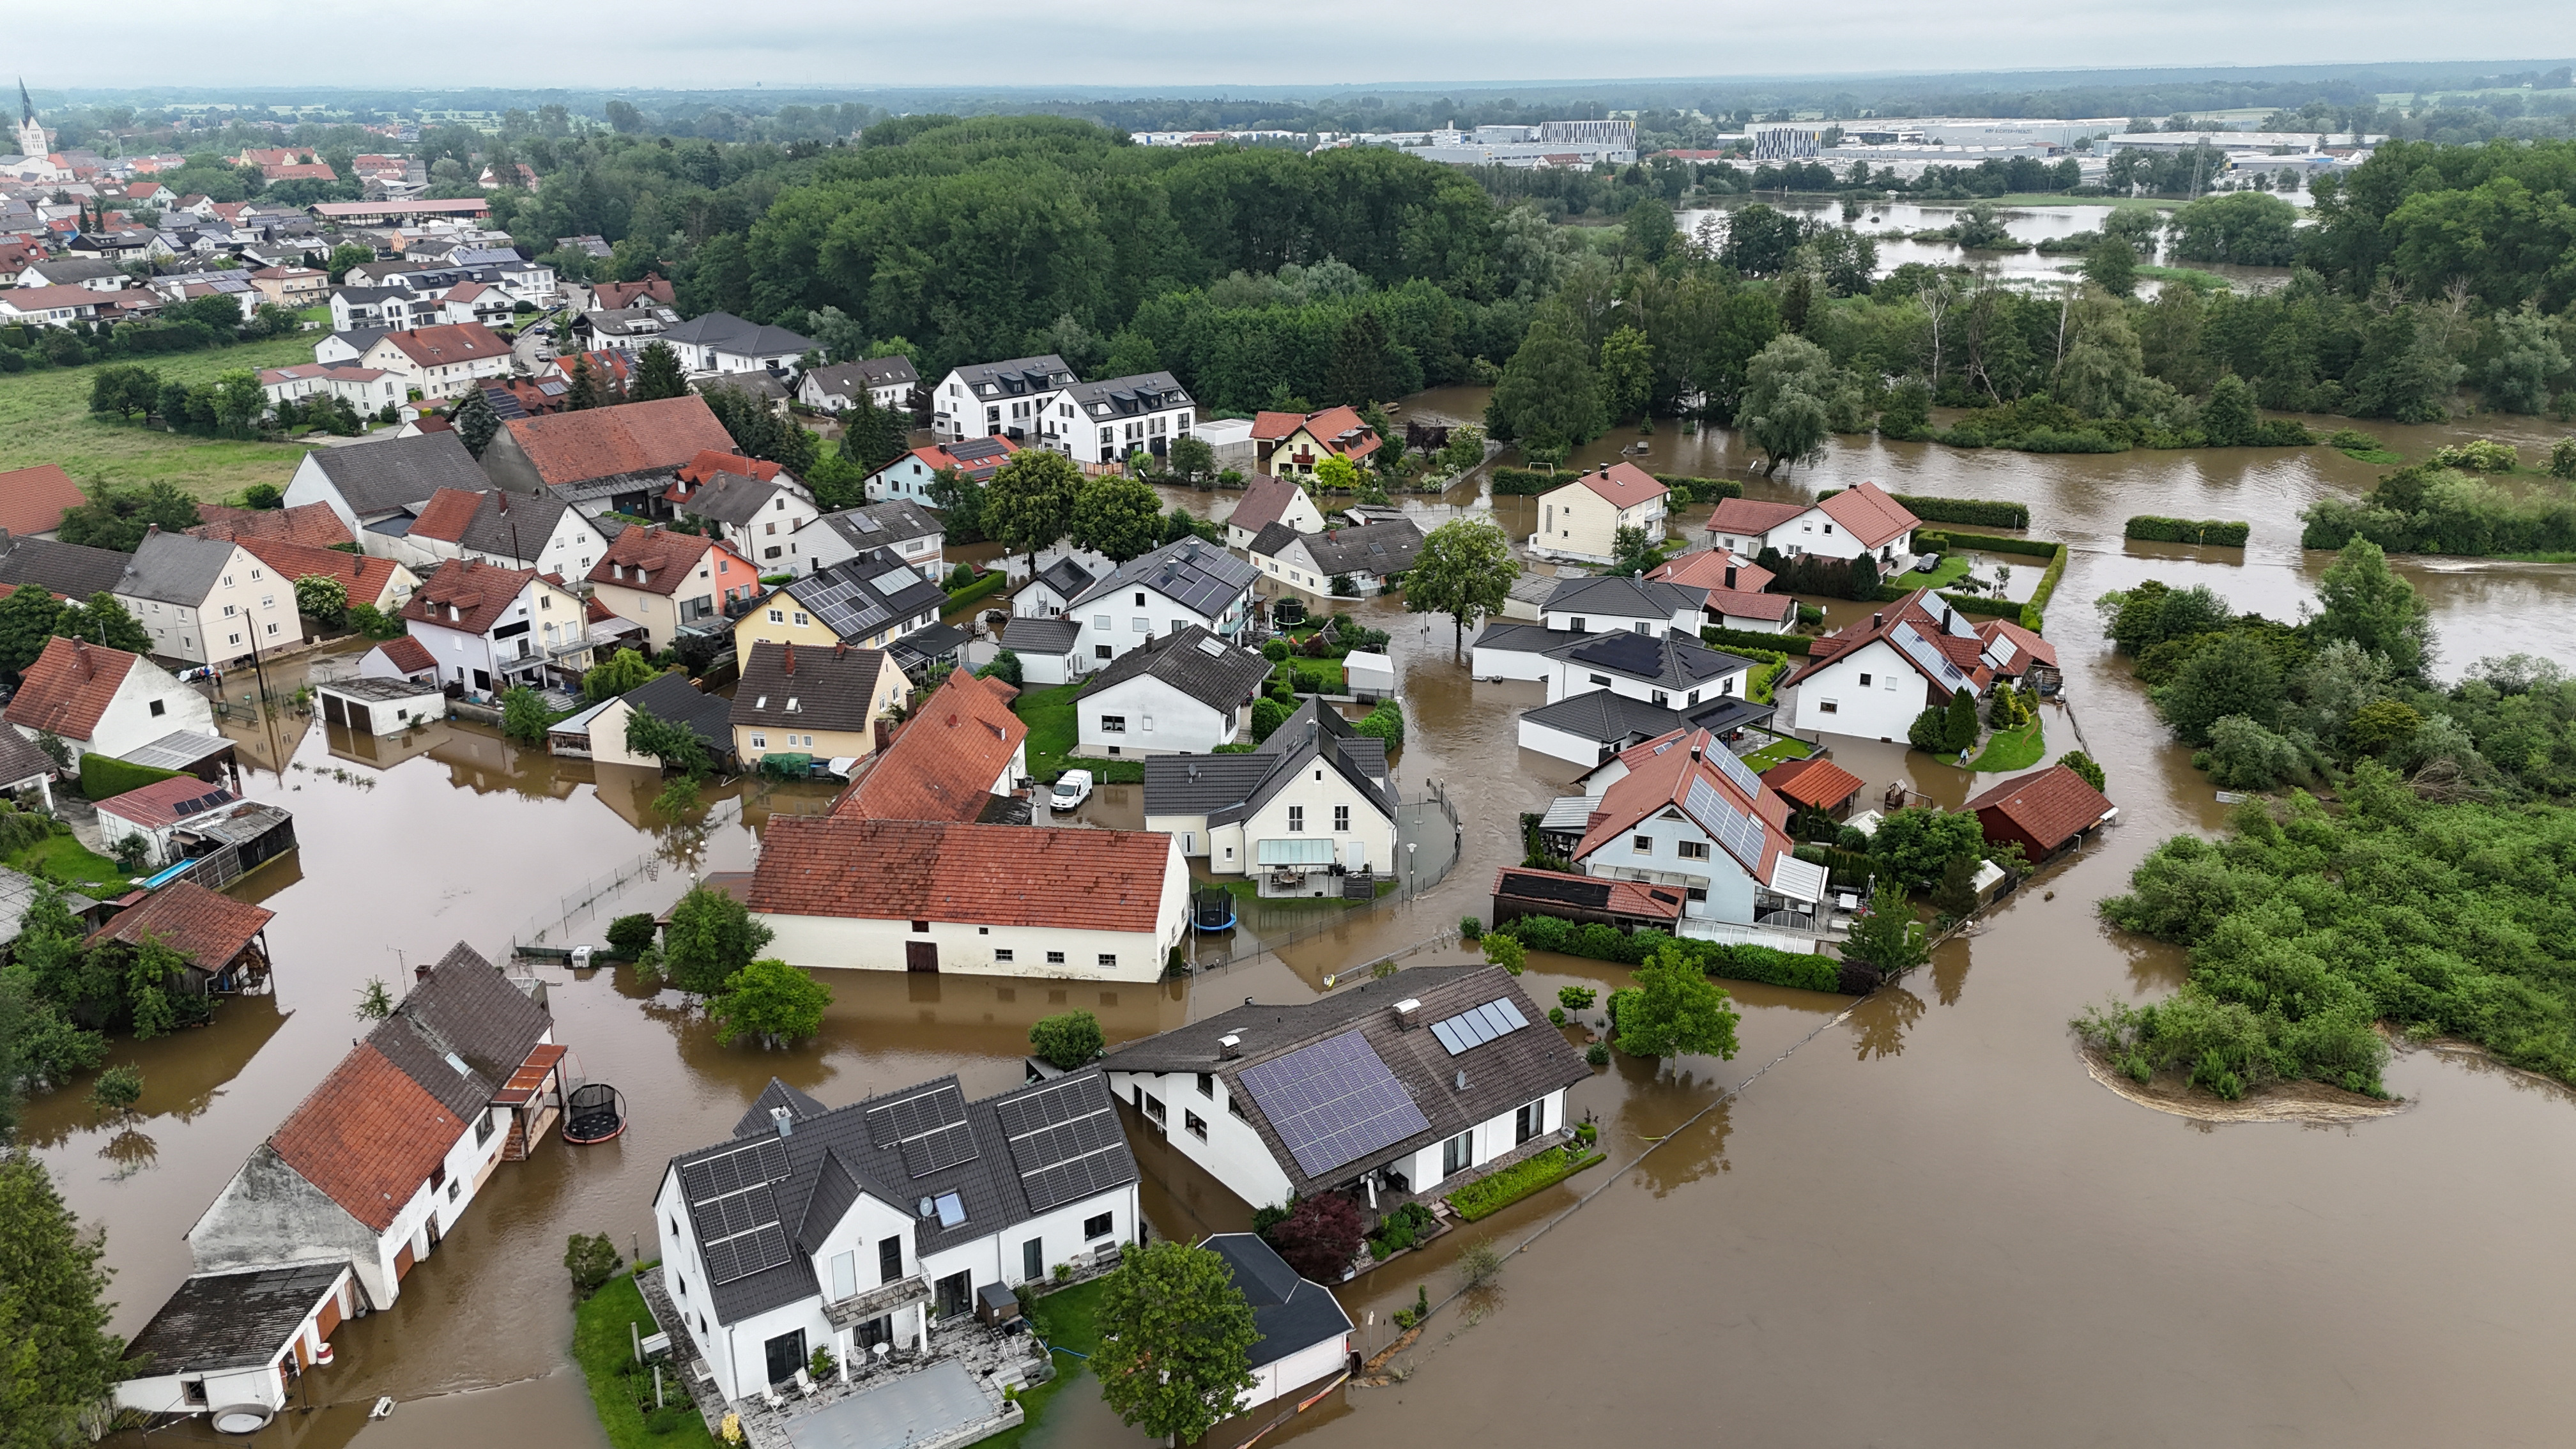 High water levels and heavy rainfalls in Bavaria